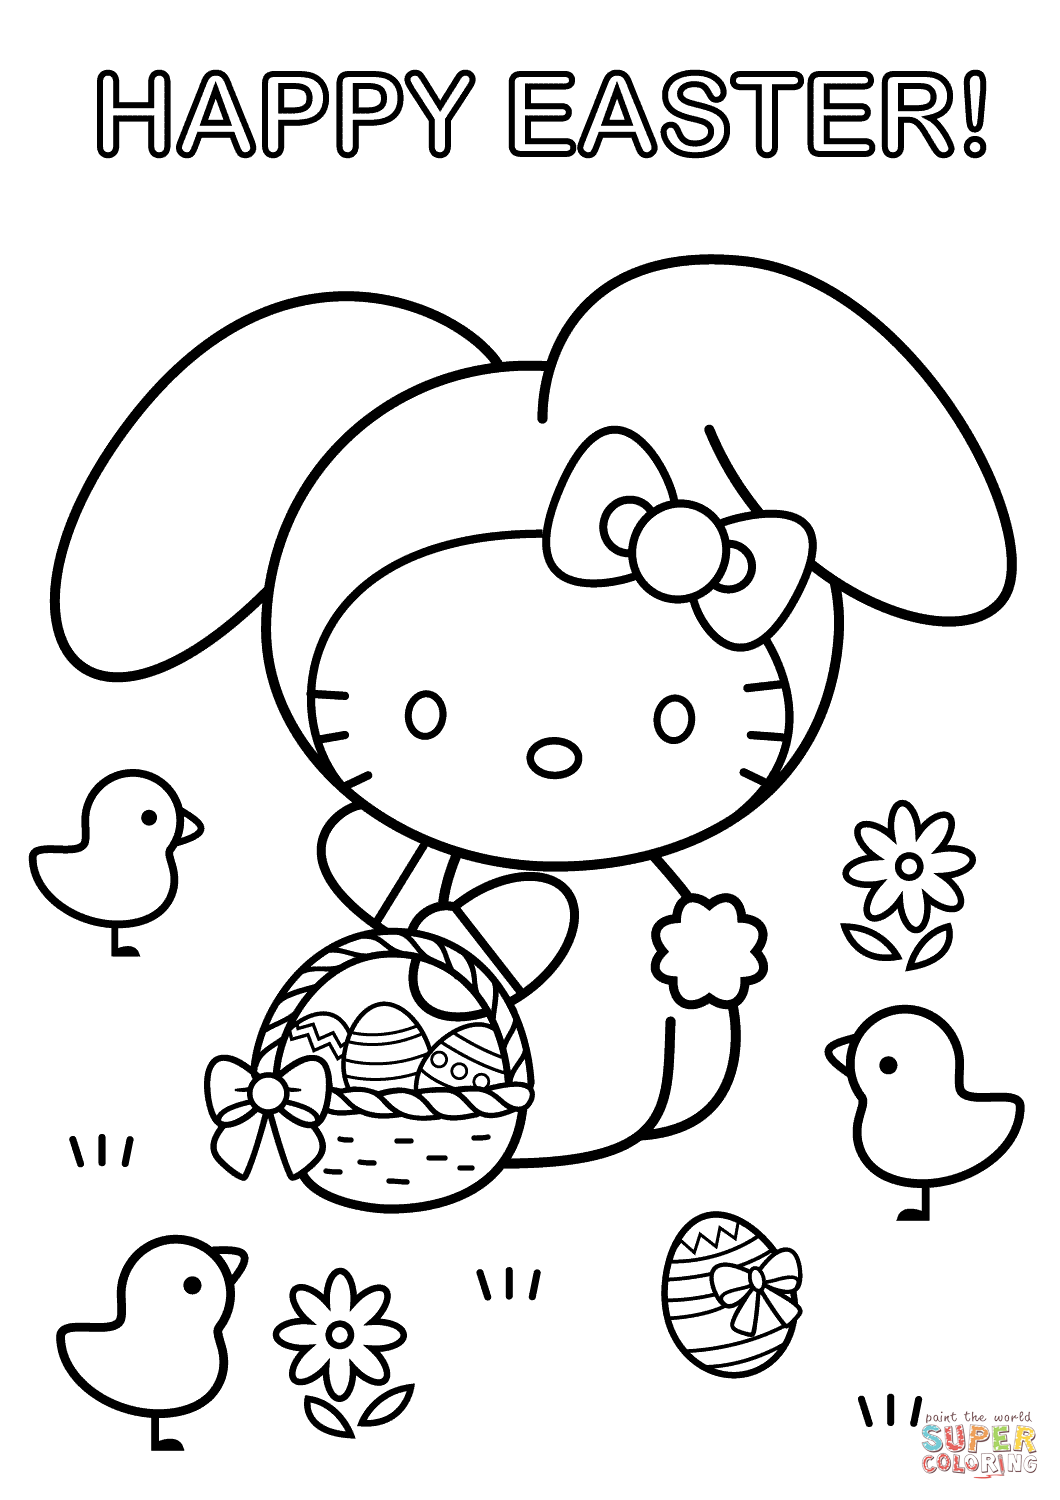 Hello Kitty Happy Easter coloring page | Free Printable Coloring Pages